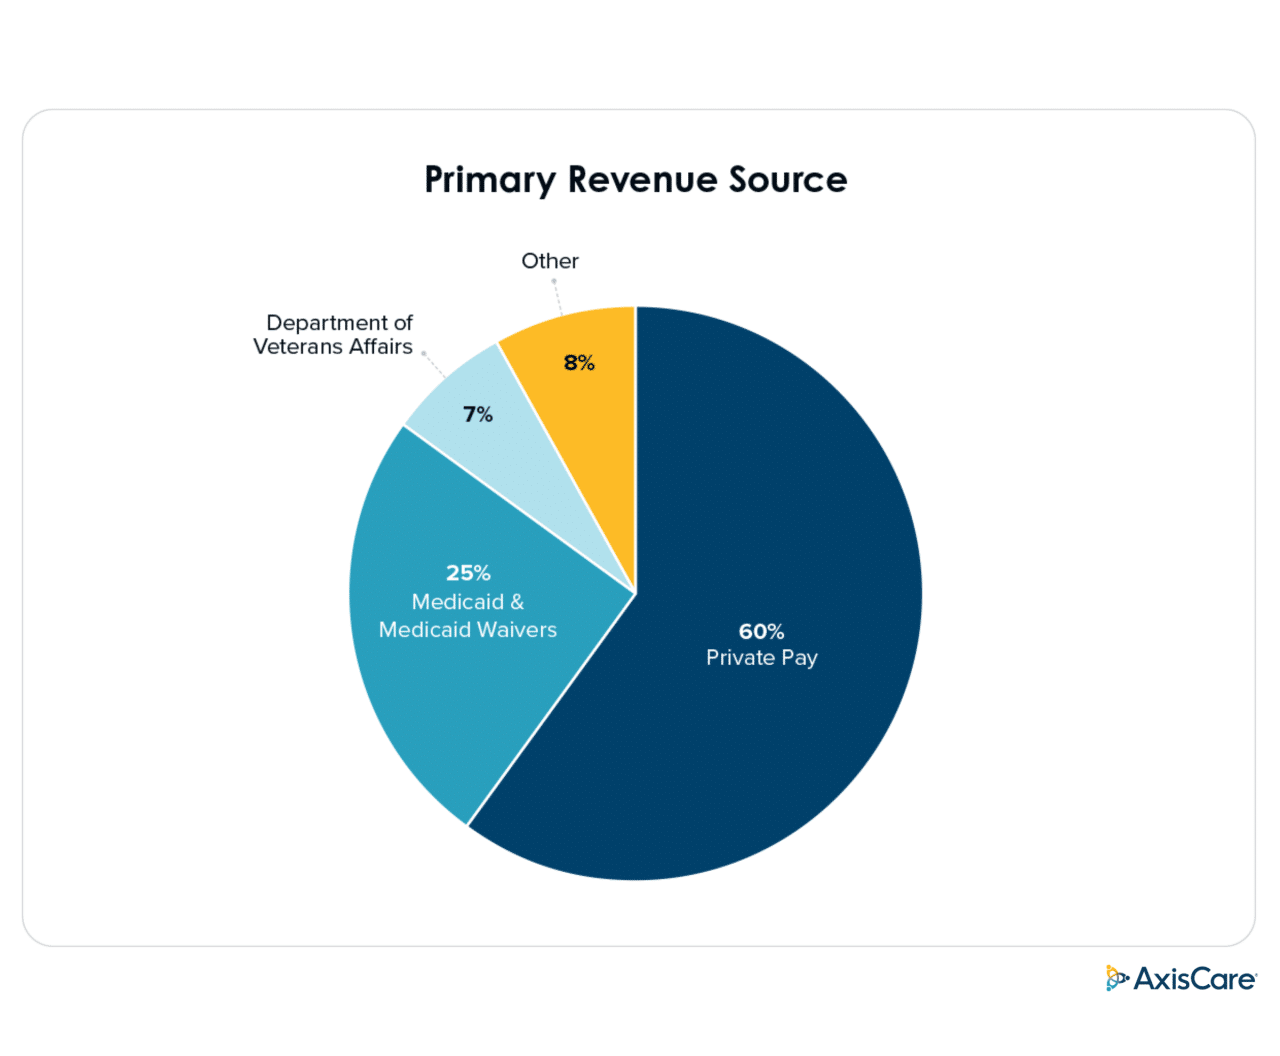 Pie Chart of Primary Revenue Source info ; Private pay, Department of Veterans Affairs, Medicaid and Medicaid Waivers, and other.